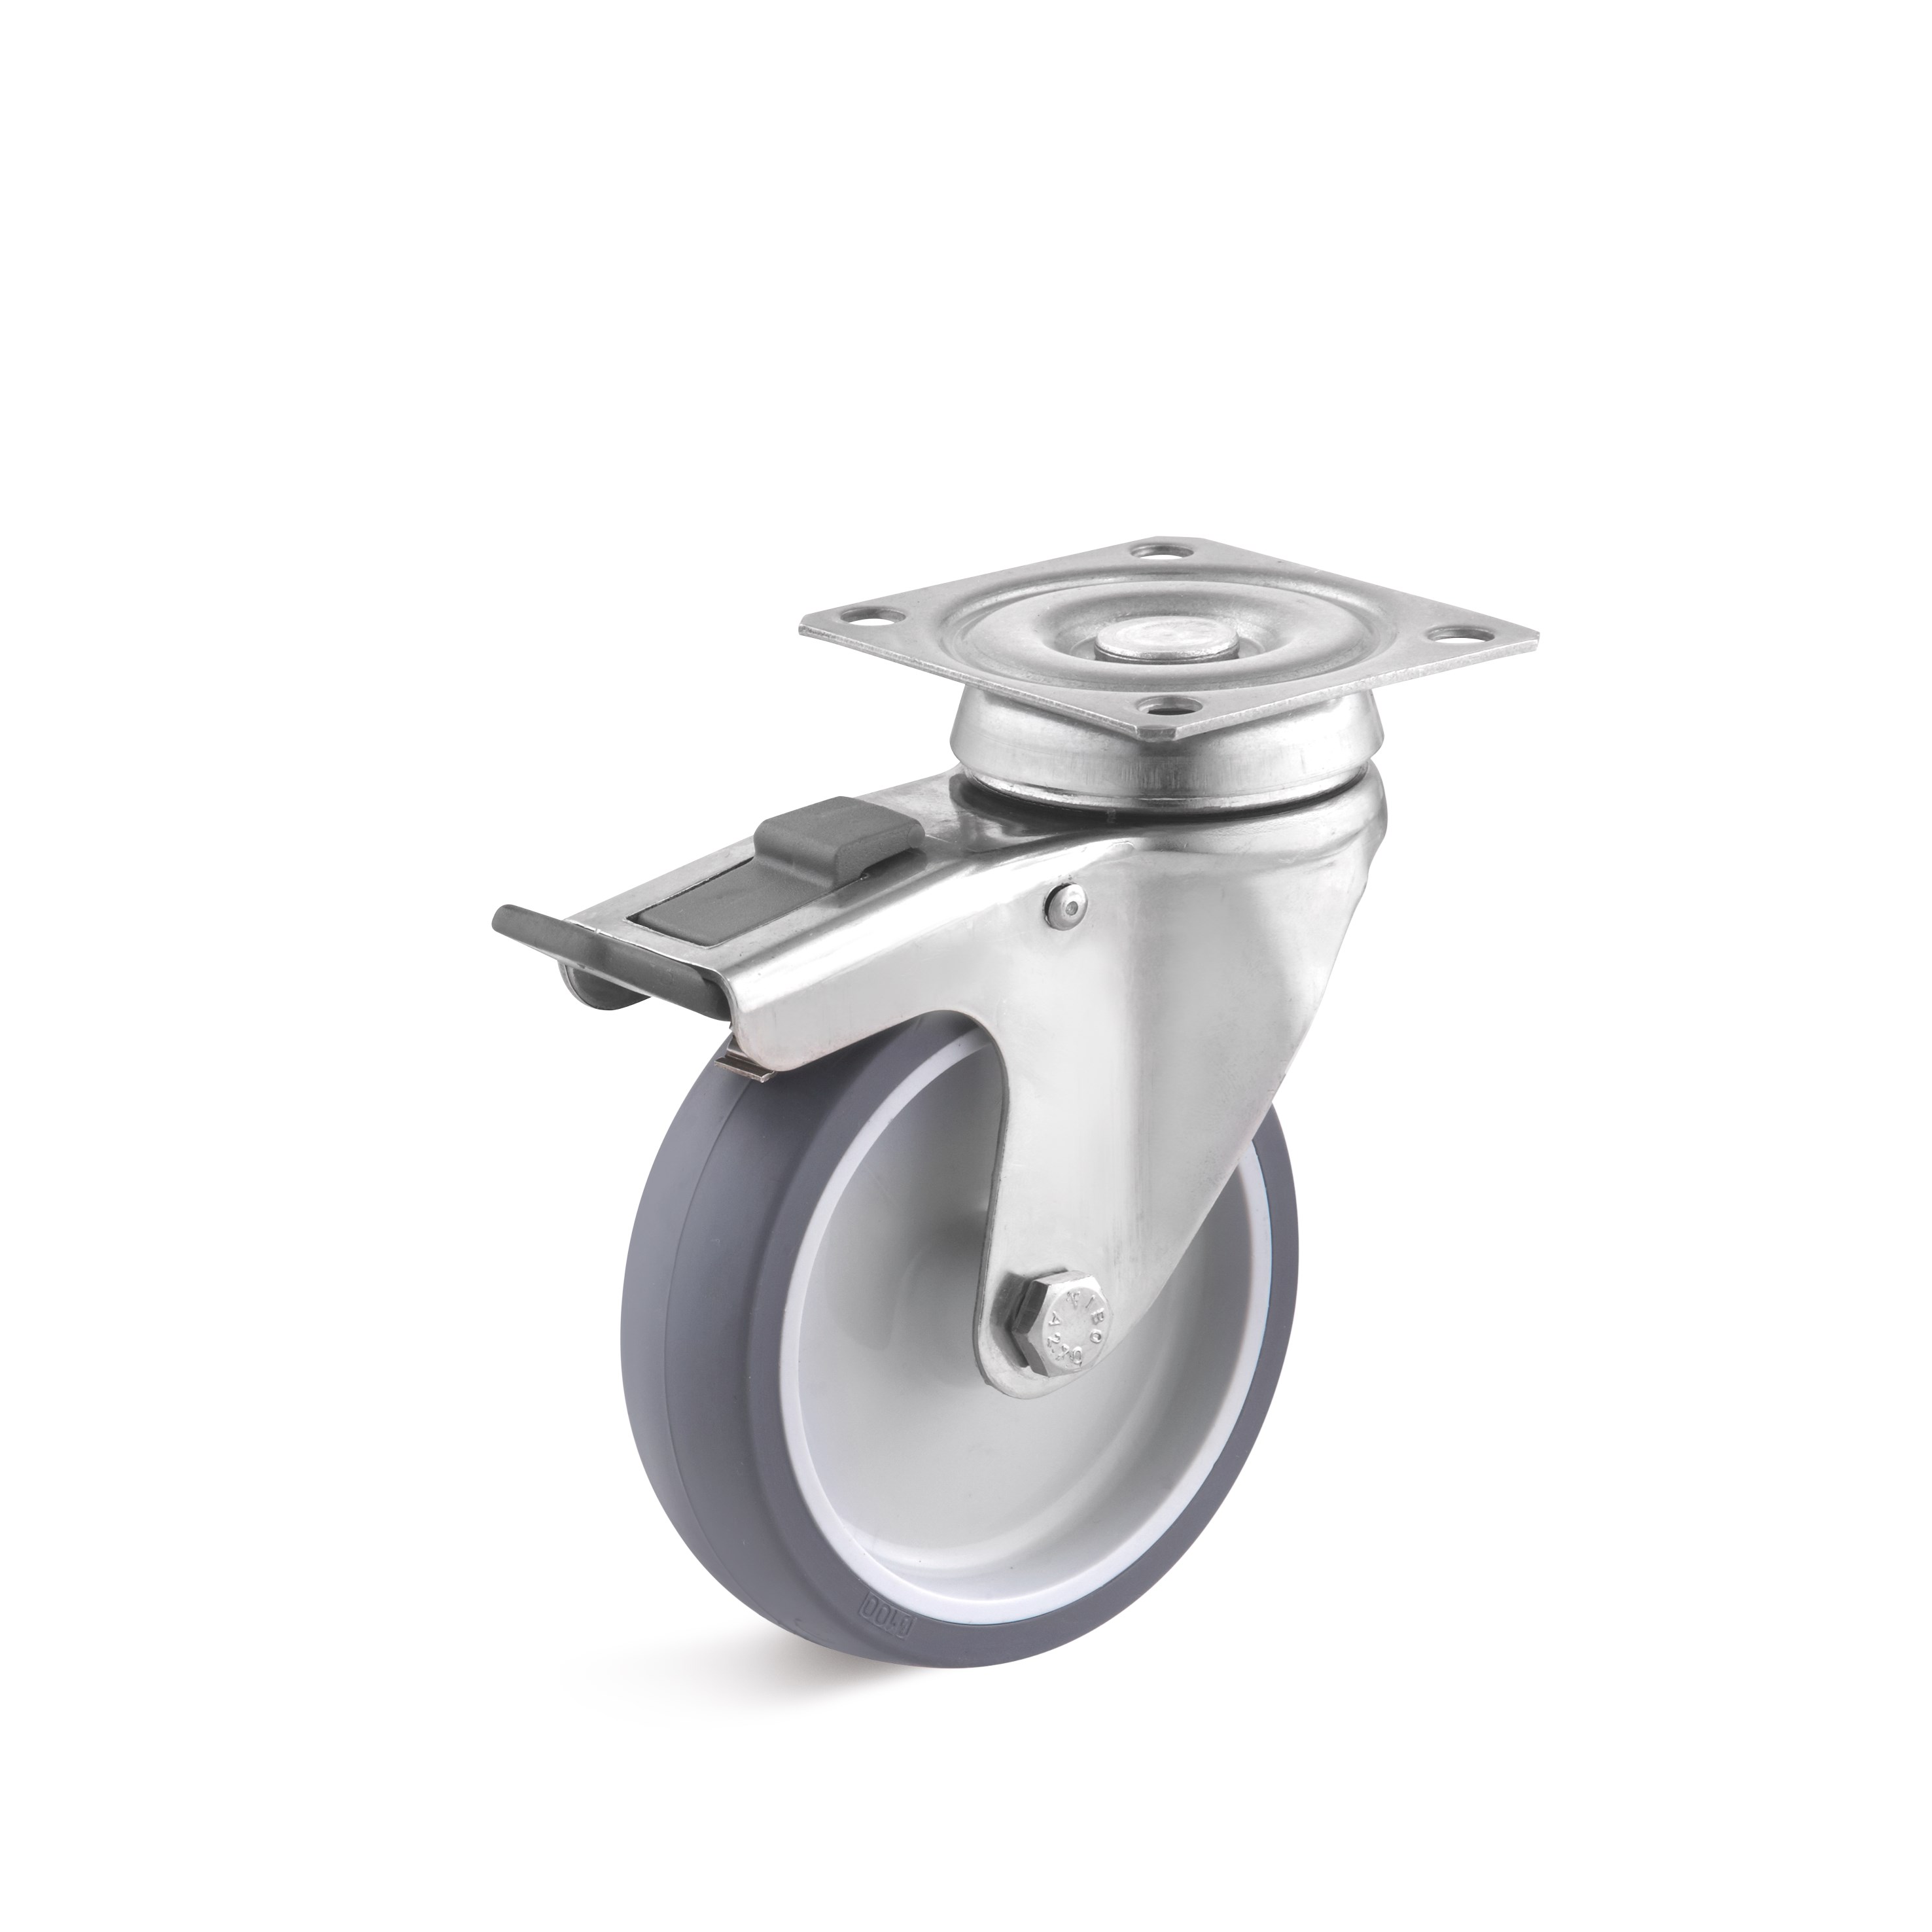 Stainless steel swivel castor with double stop and thermoplastic wheel